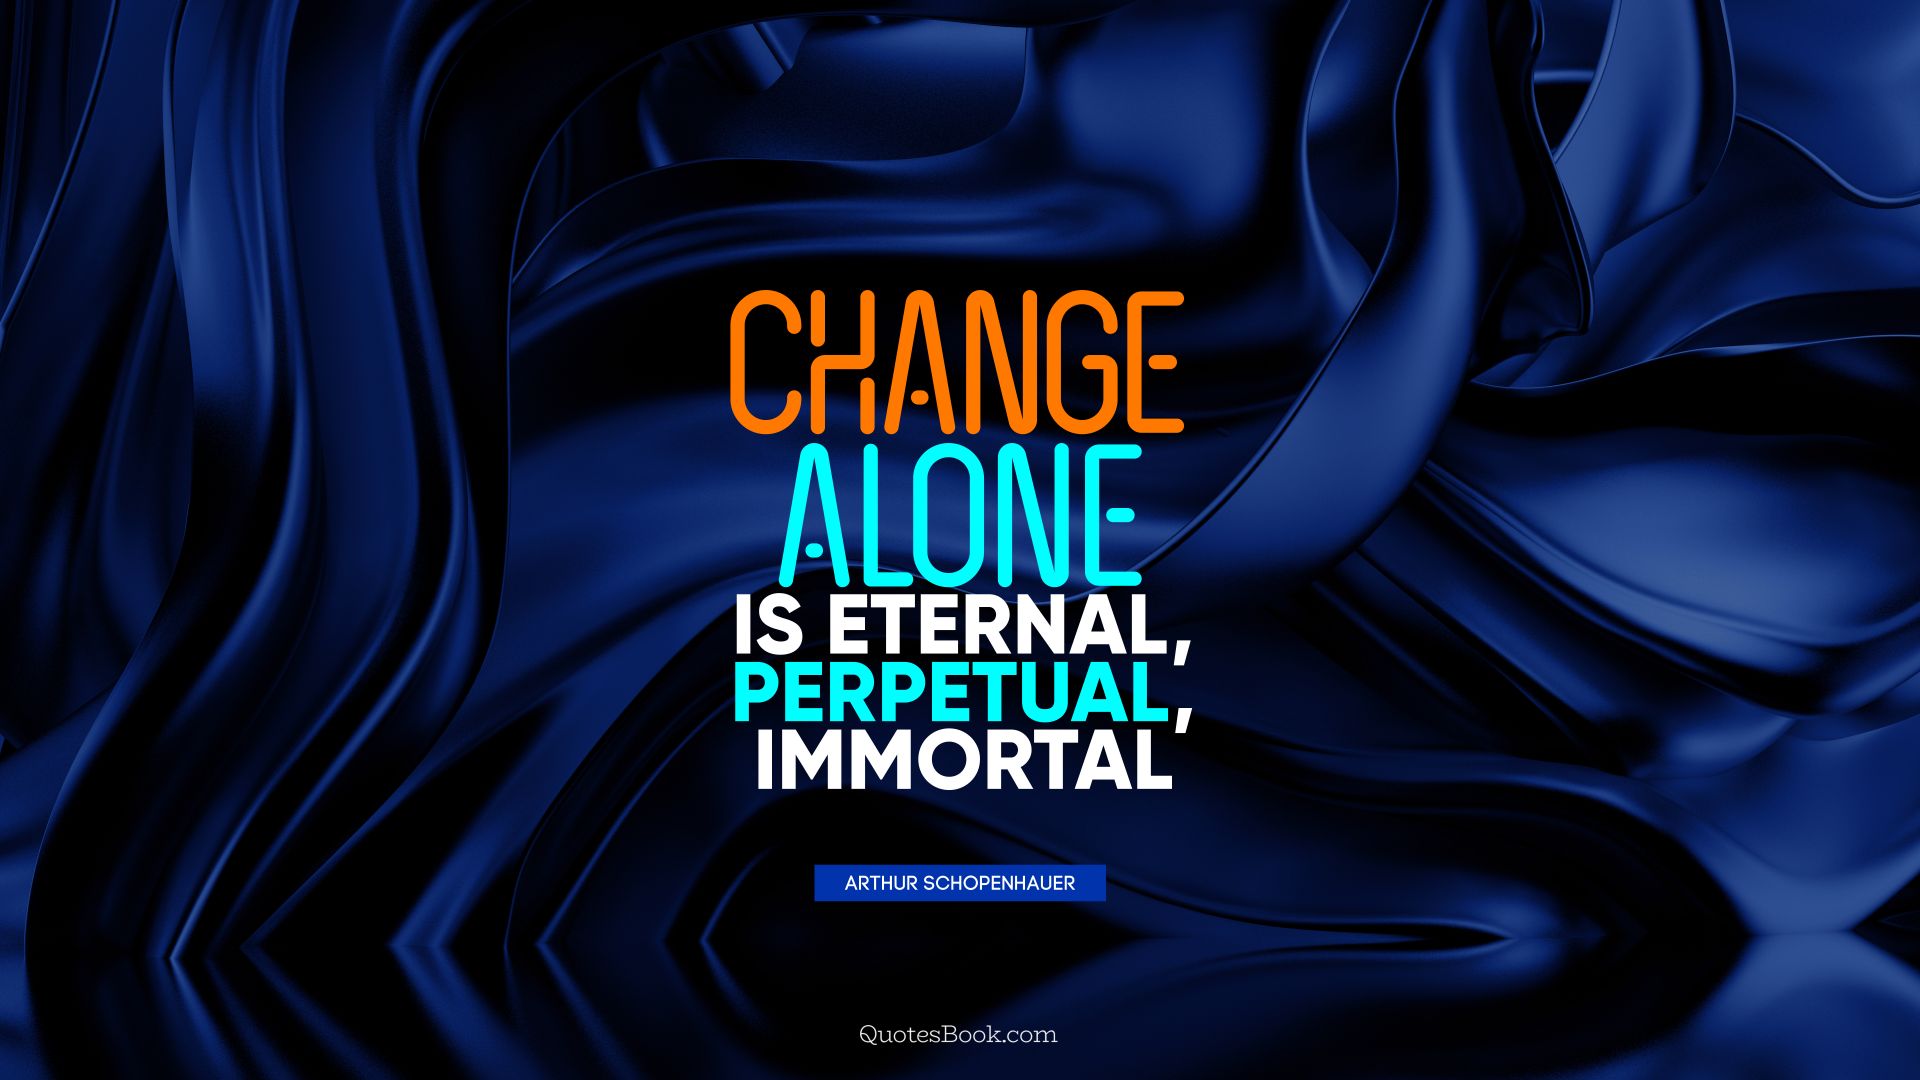 Change alone is eternal, perpetual, immortal. - Quote by Arthur Schopenhauer